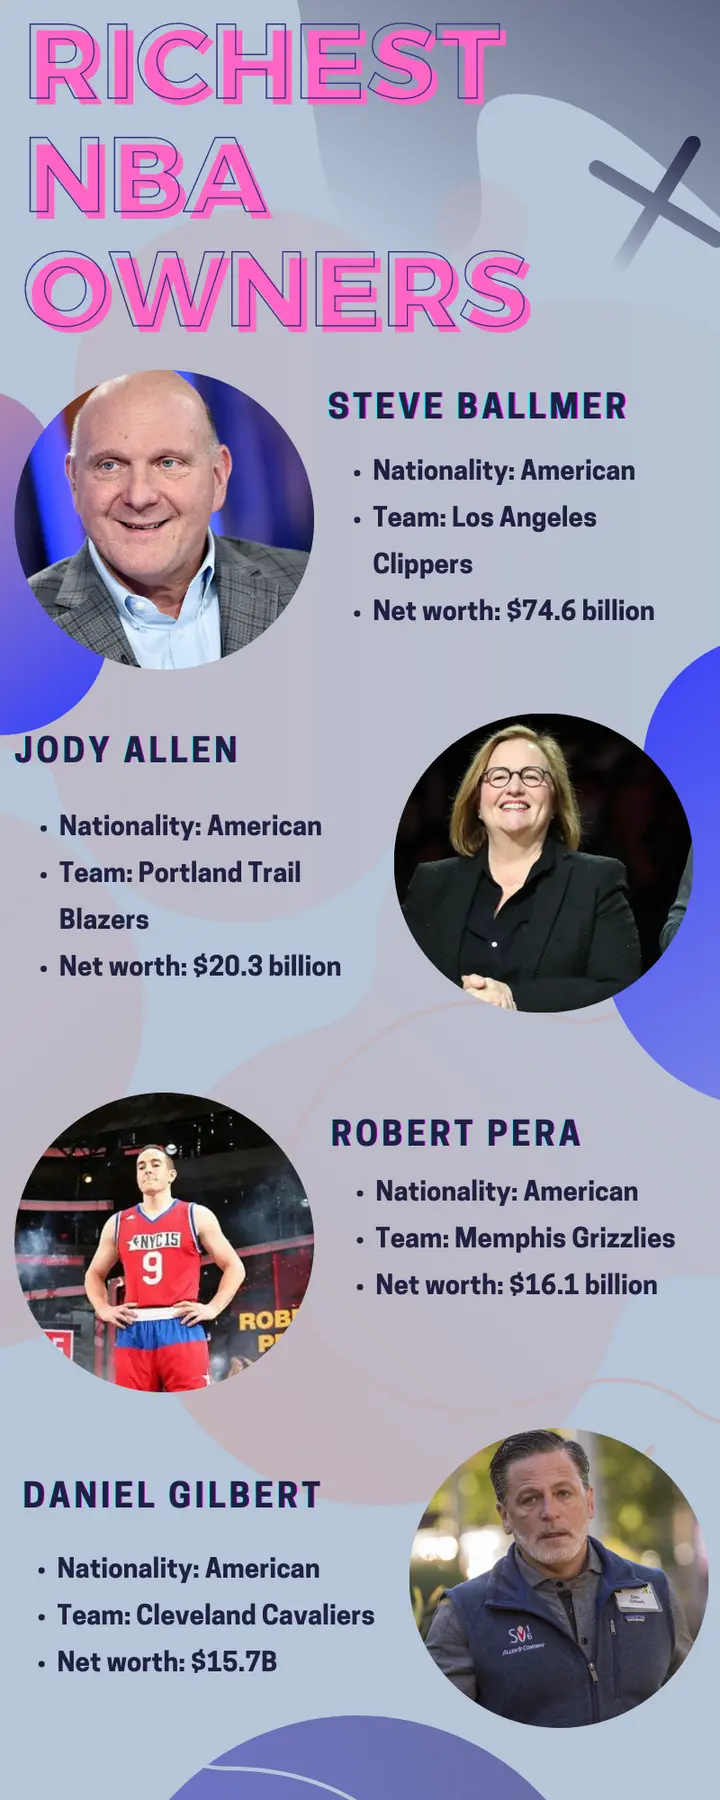 Top 20 richest NBA owners